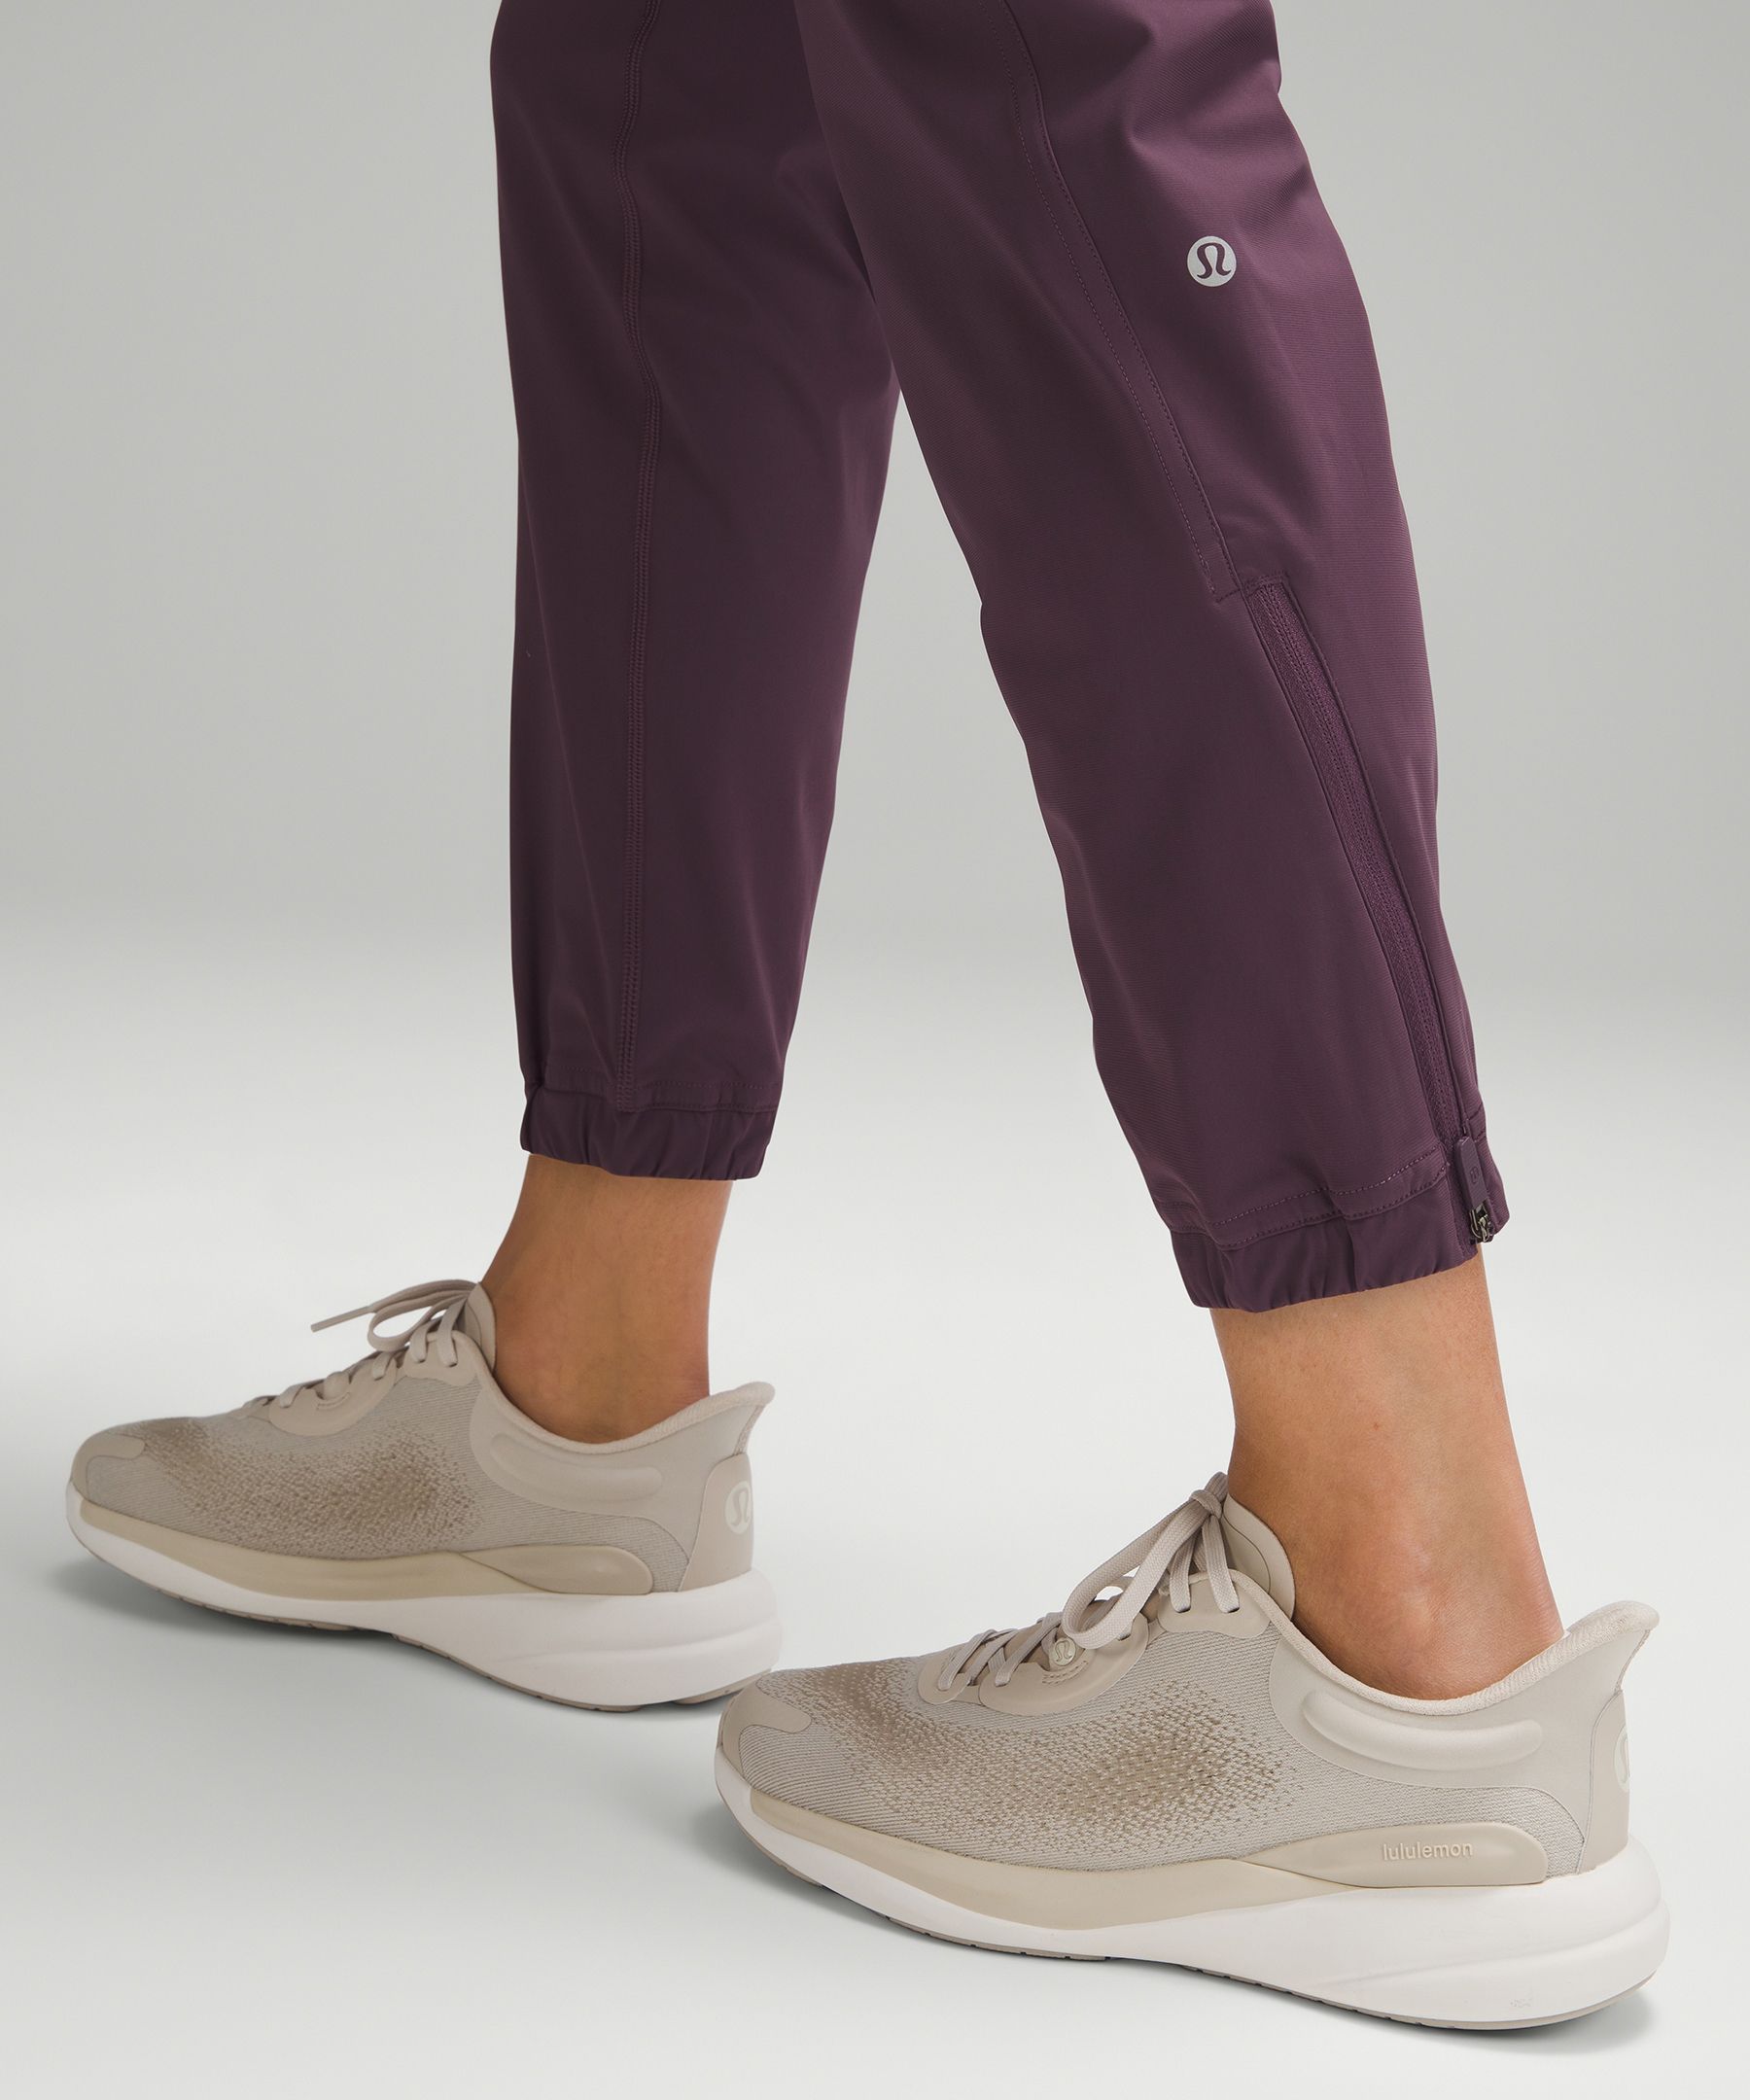 a review. Featuring RTR, align joggers, adapted state jogger, and